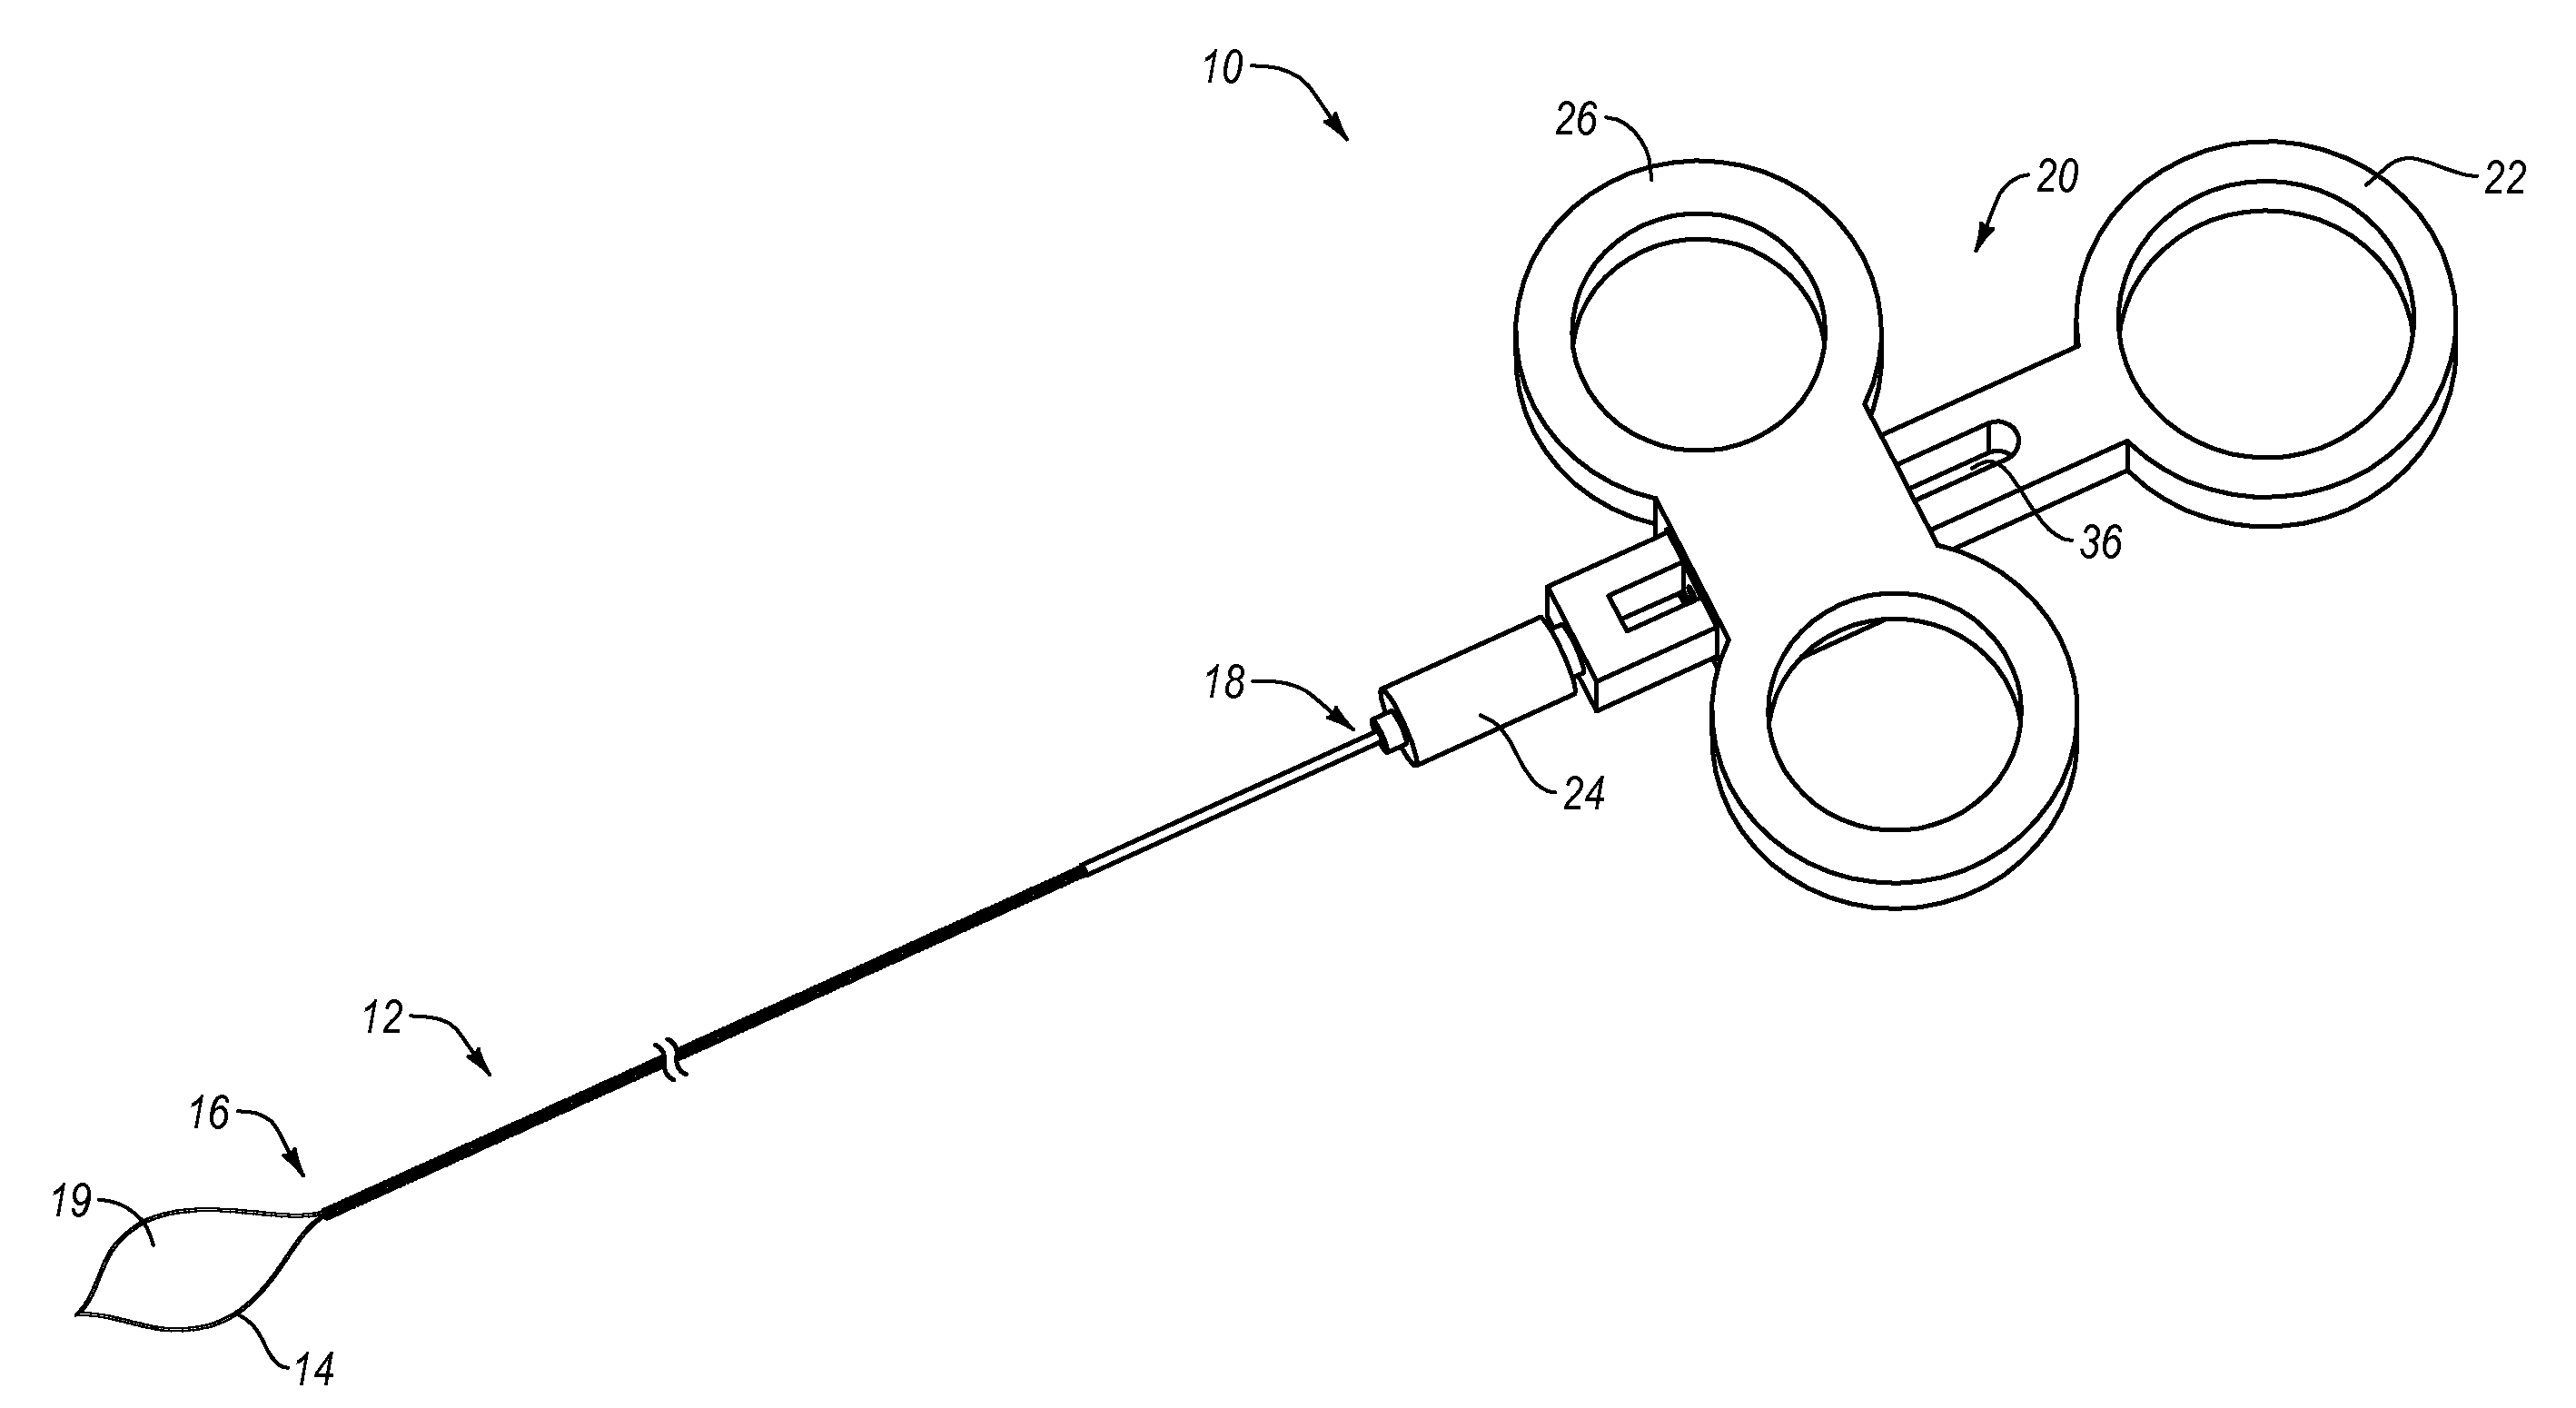 Steerable surgical snare and method of use